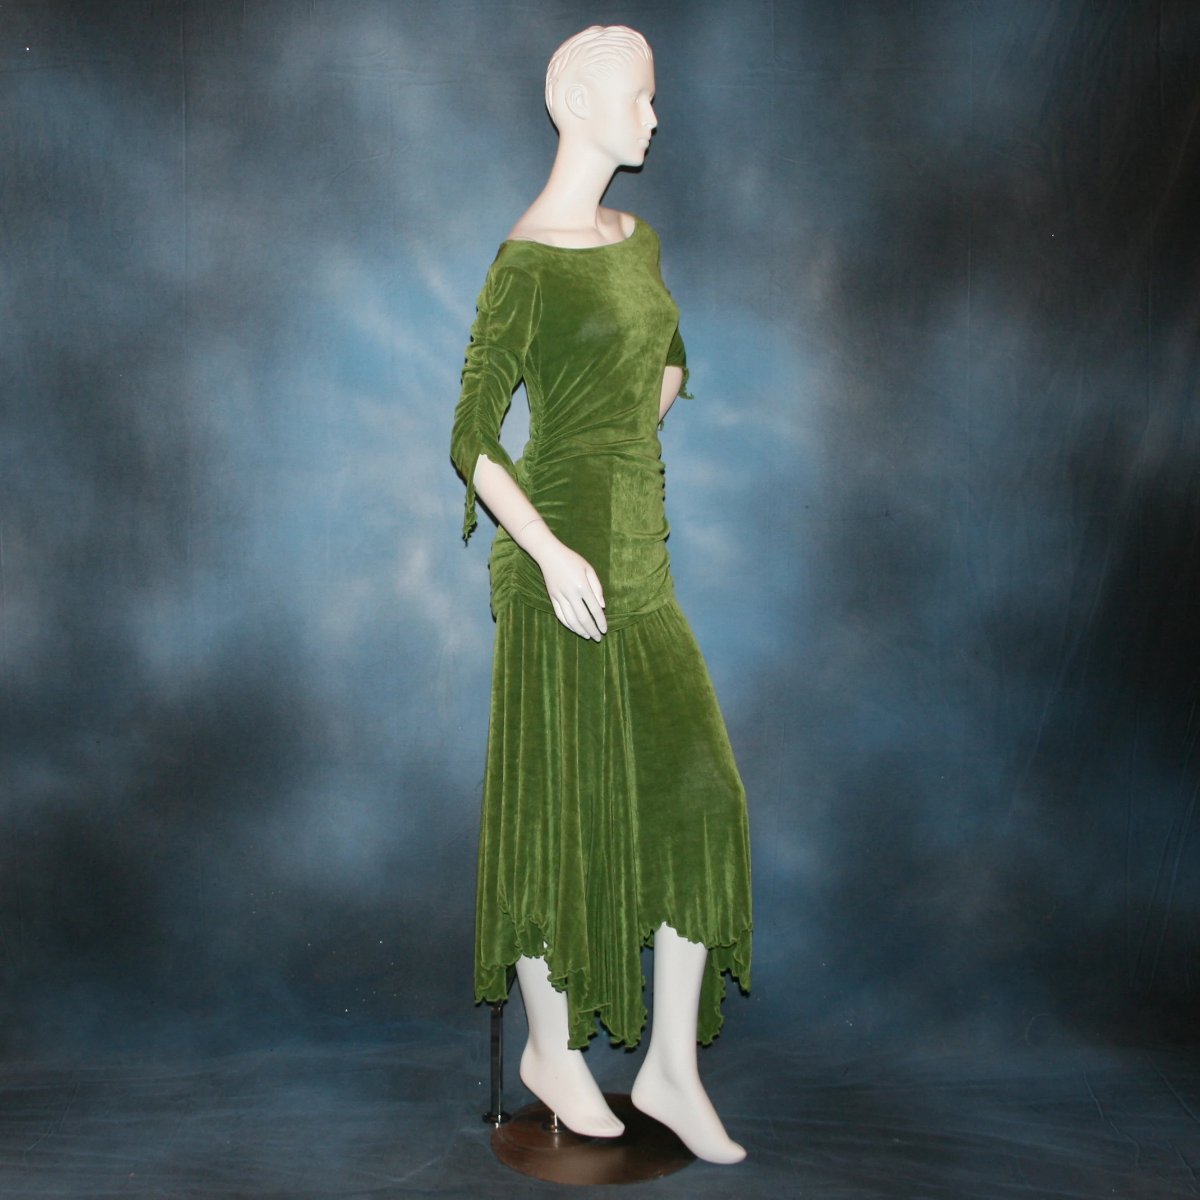 right side view of Ruched top with ruched 3/4 sleeves with a slight flaired detail includes trumpet flaired ballroom dance skirt with peaks created of luxurious olive green solid slinky fabric, & can be custom created in many colors. Great for ballroom dance teachers!